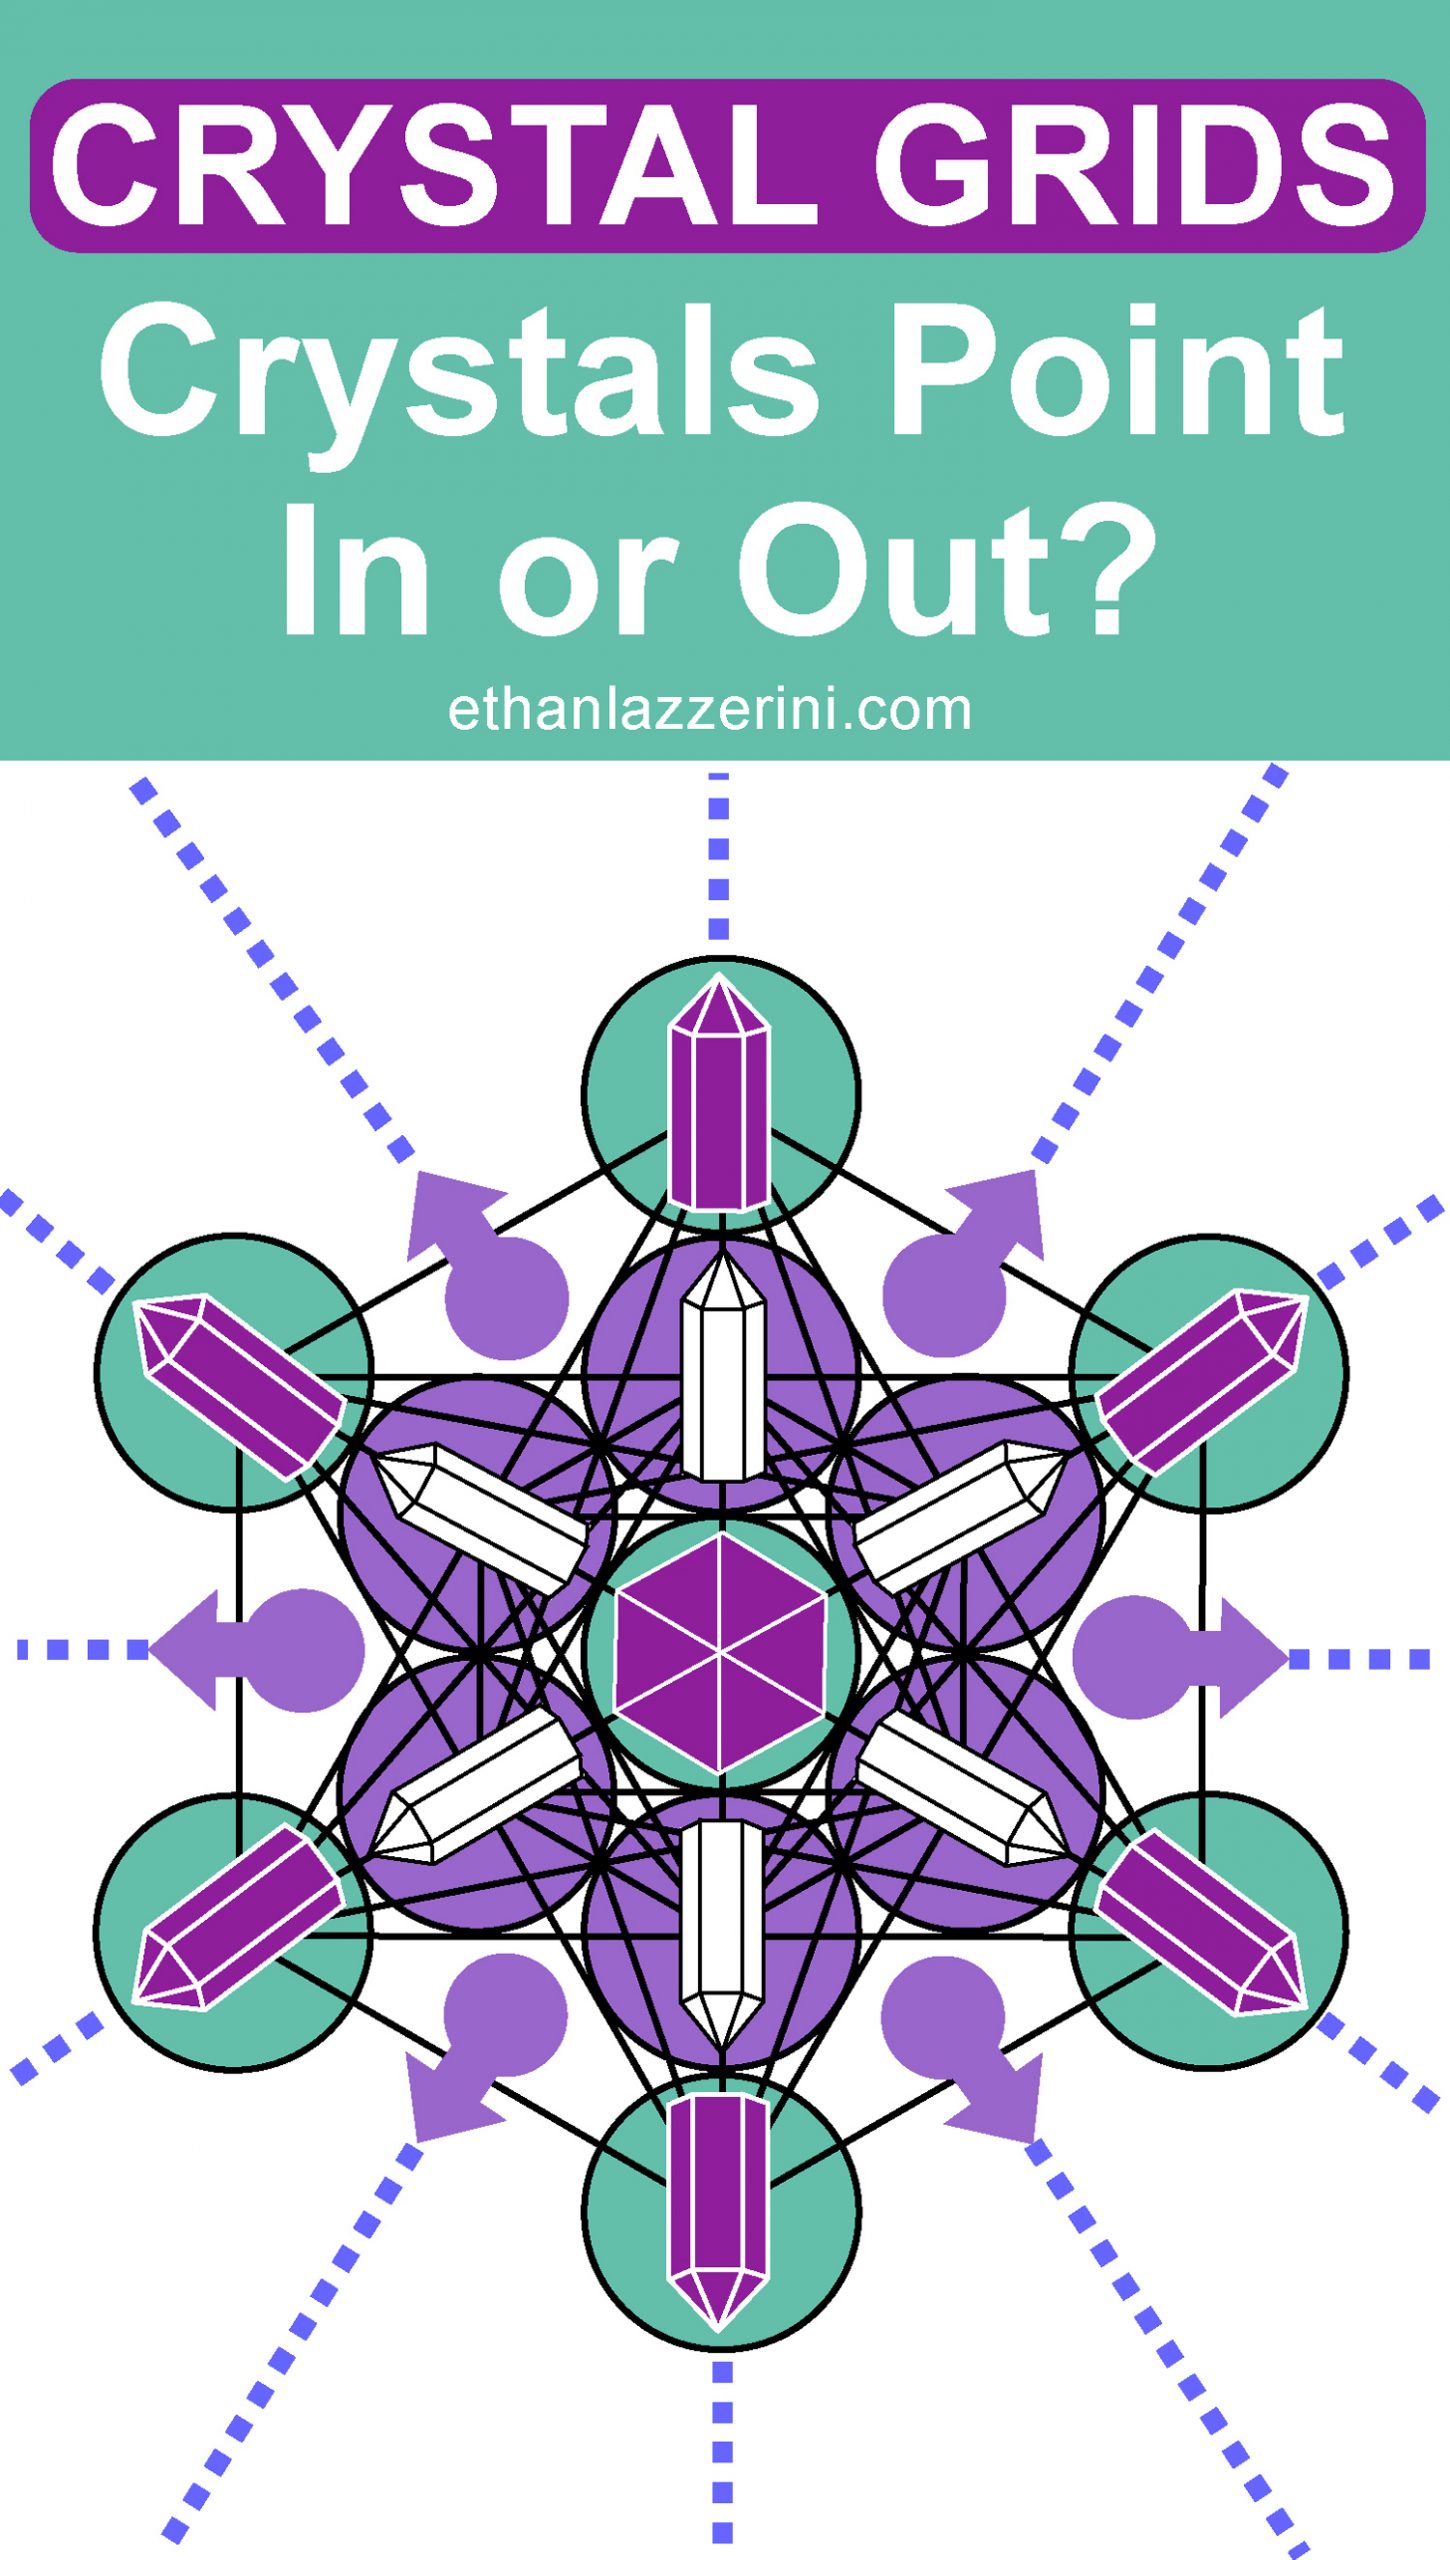 Crystal grid diagram with energy beams pointing outwards